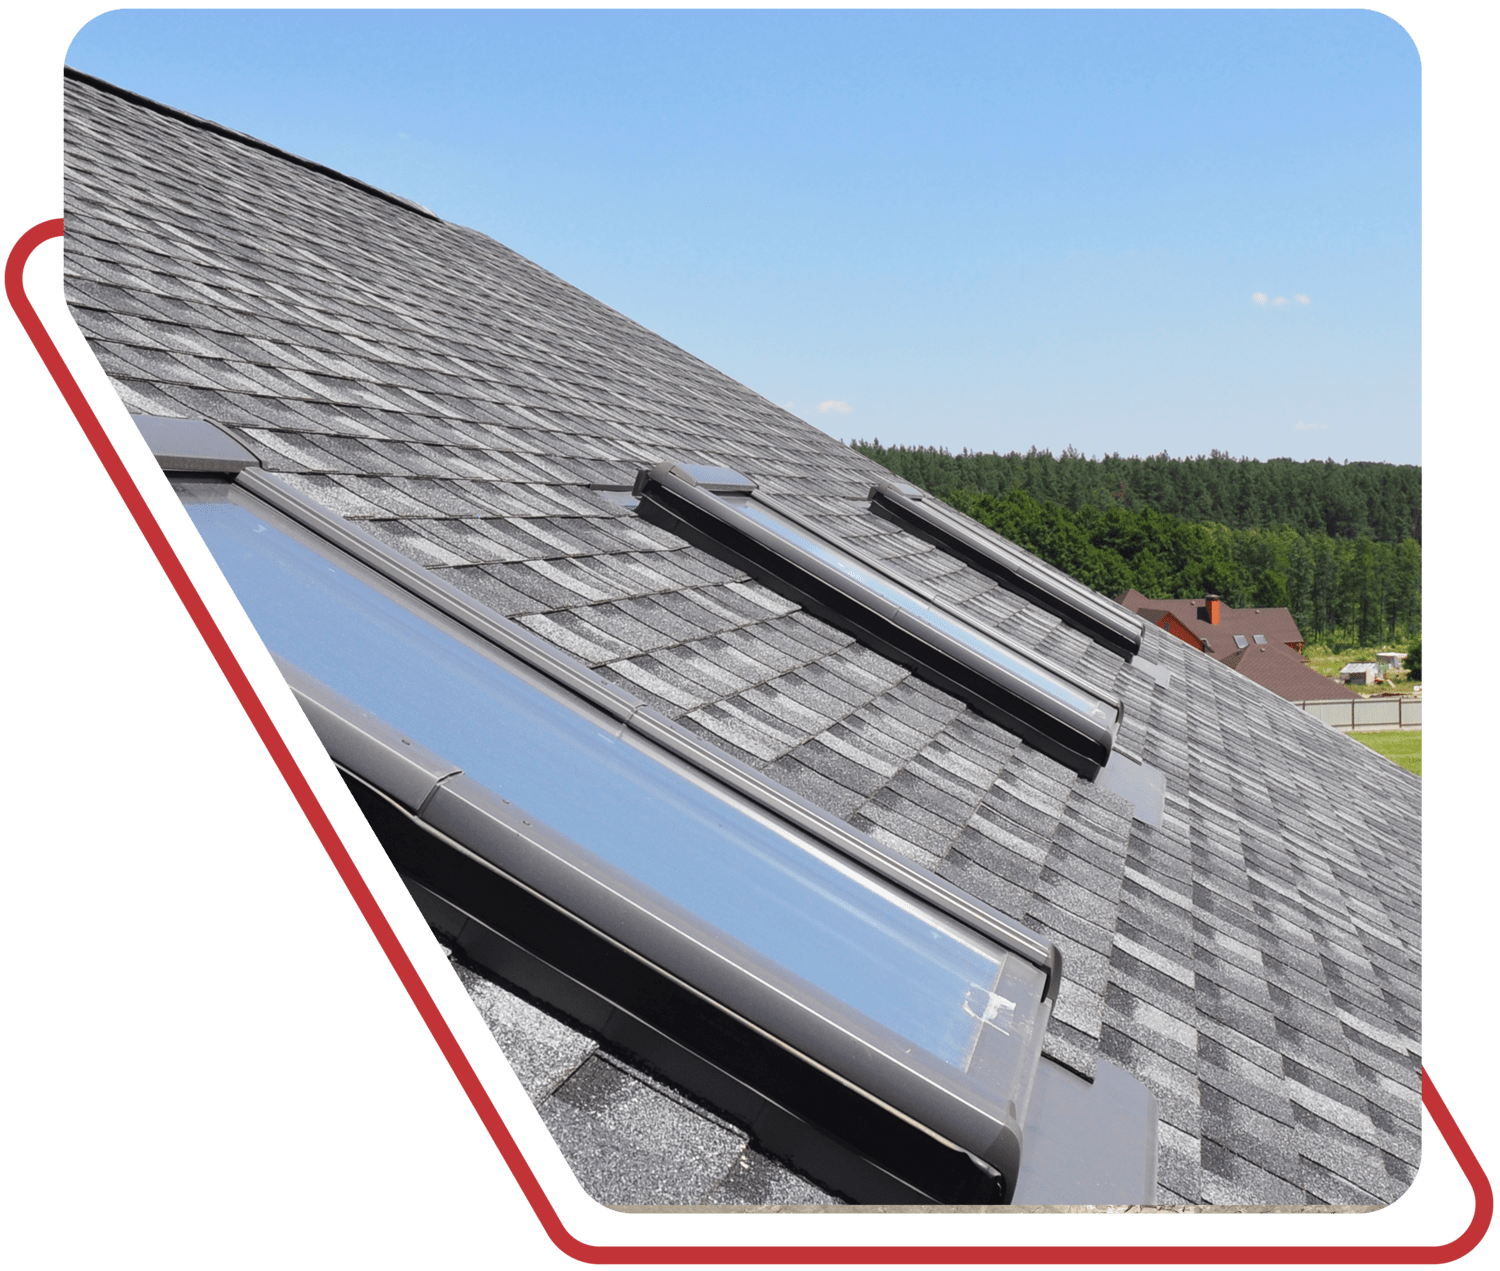 Roofing Repair with Skylights - Valued Renovations